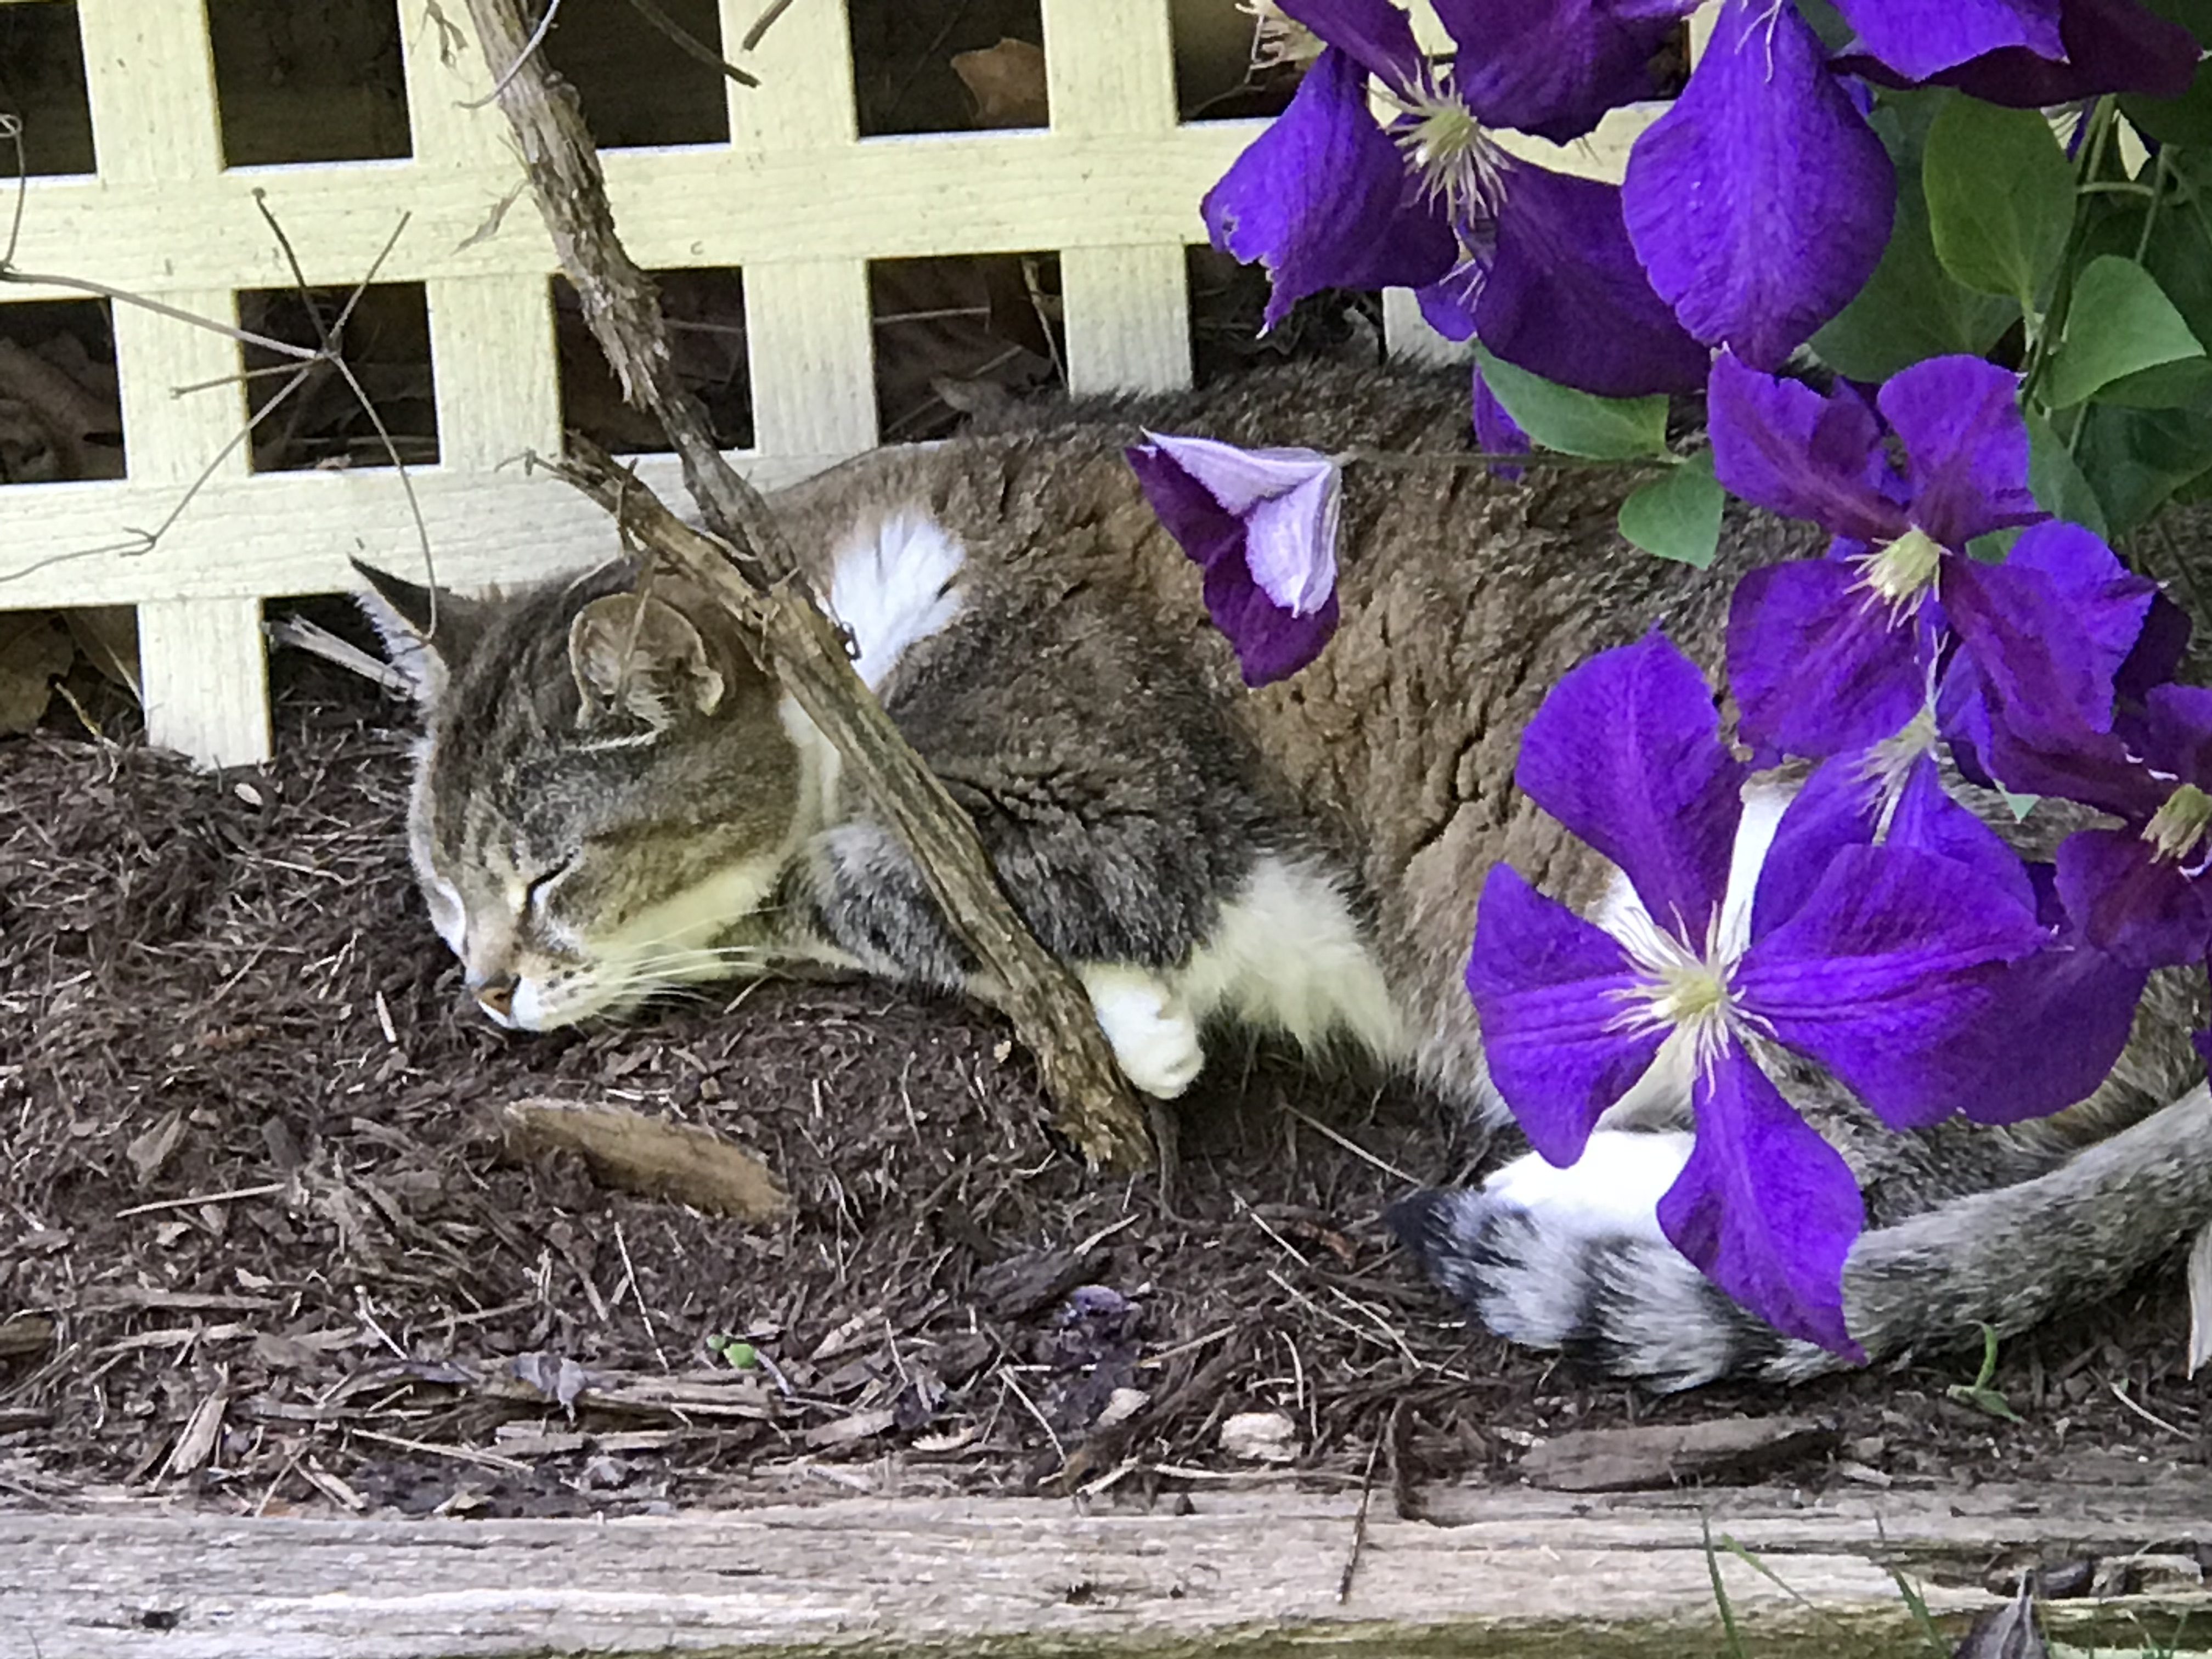 Bibb the cat snoozing in the prple clematis